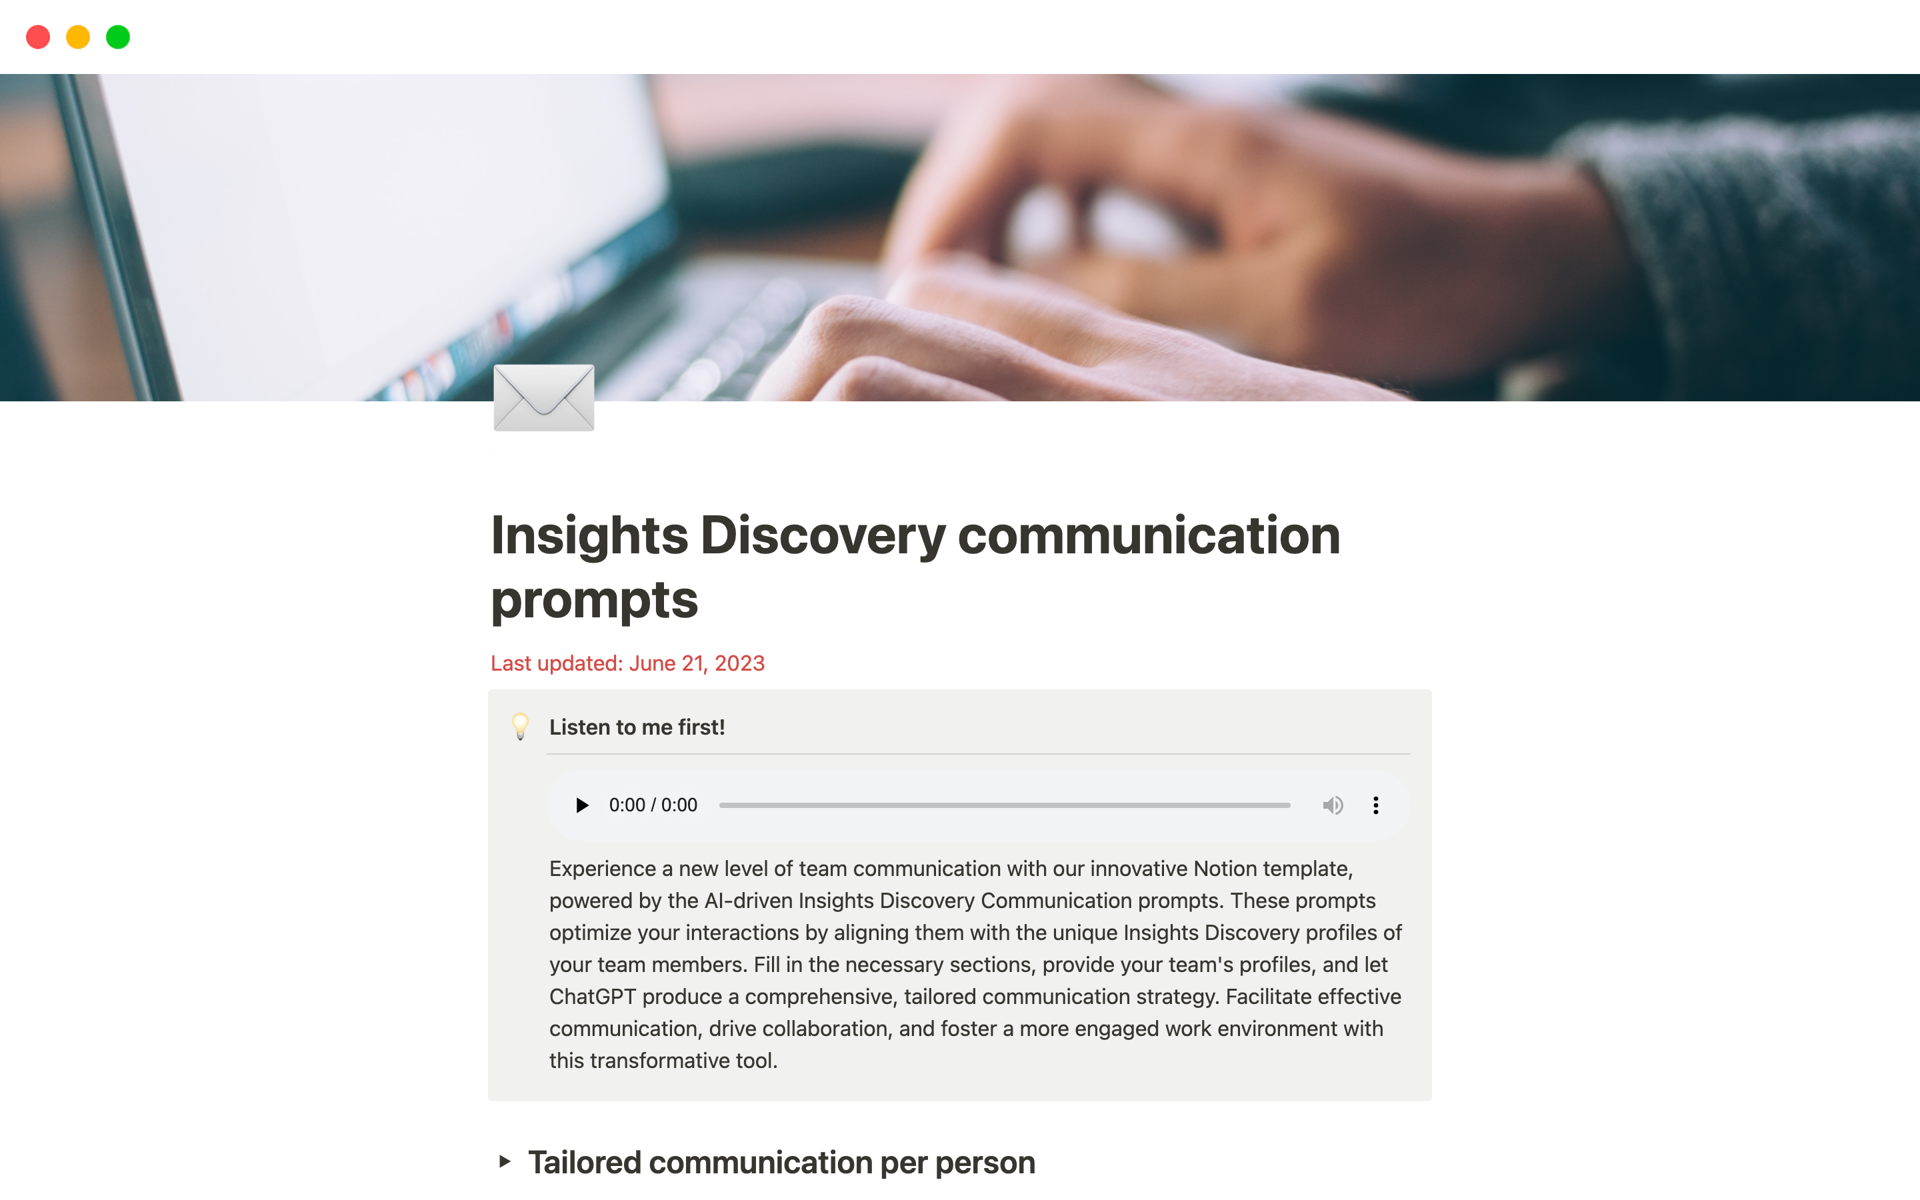 Transform team communication with our ChatGPT prompts that tailors strategies to your team's unique Insights Discovery profiles, fostering collaboration and engagement.